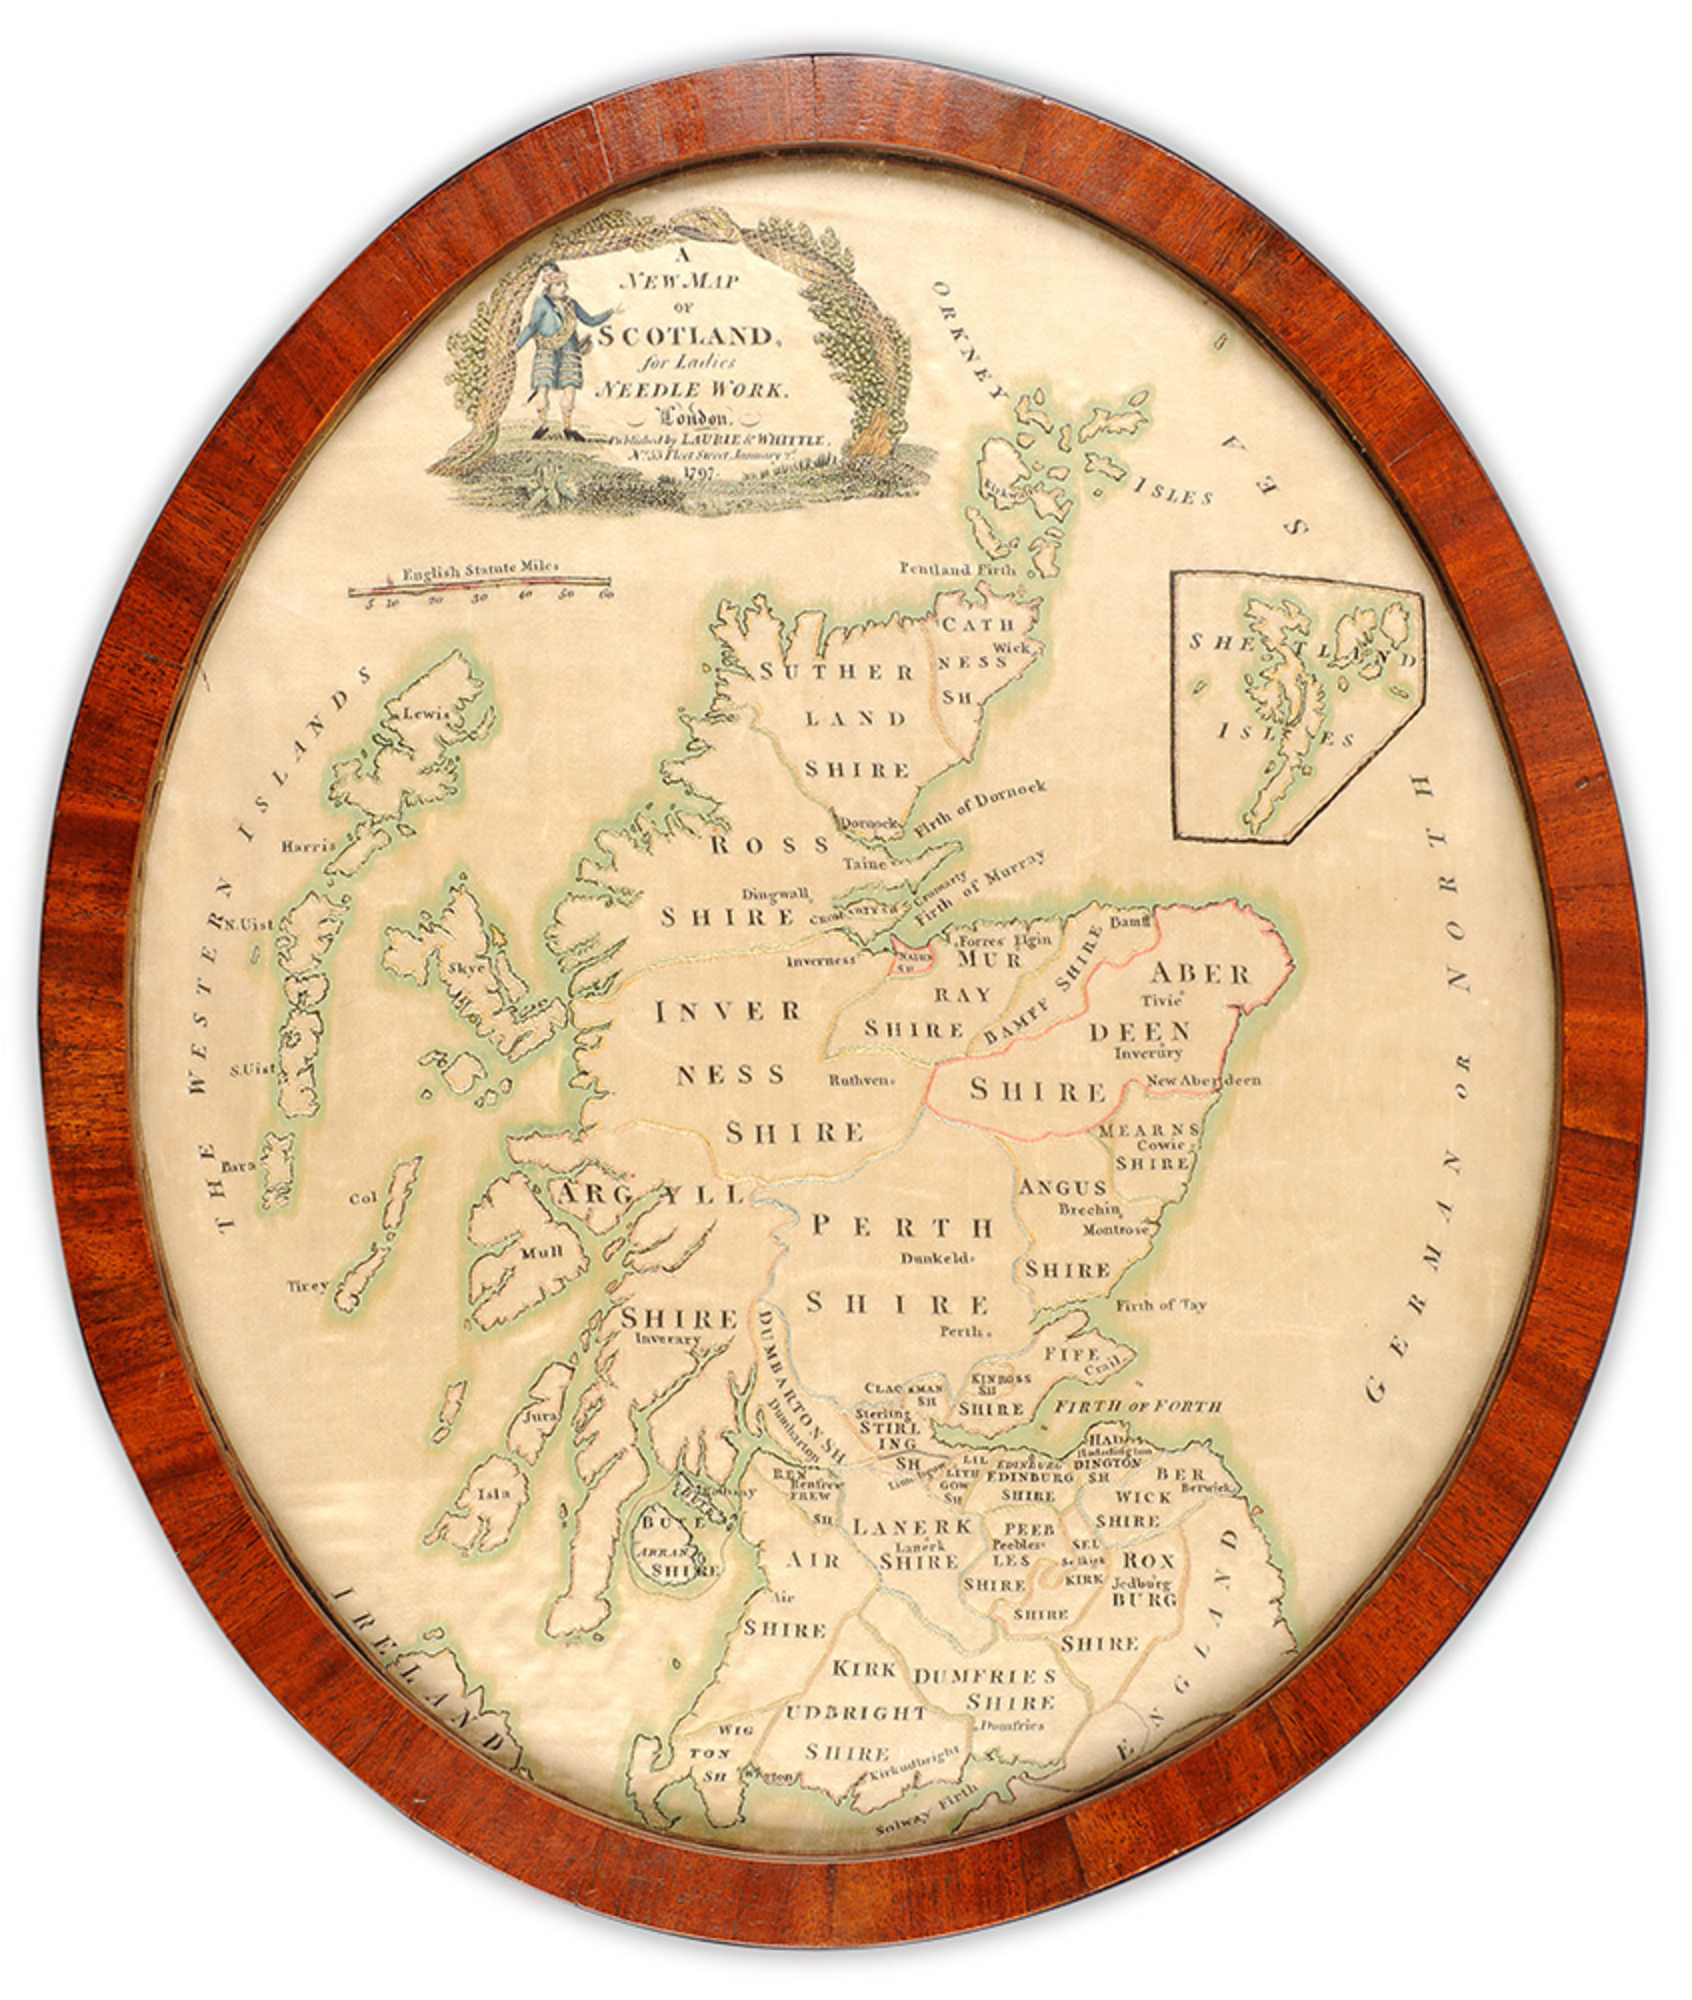 A New Map of Scotland for Ladies Needlework